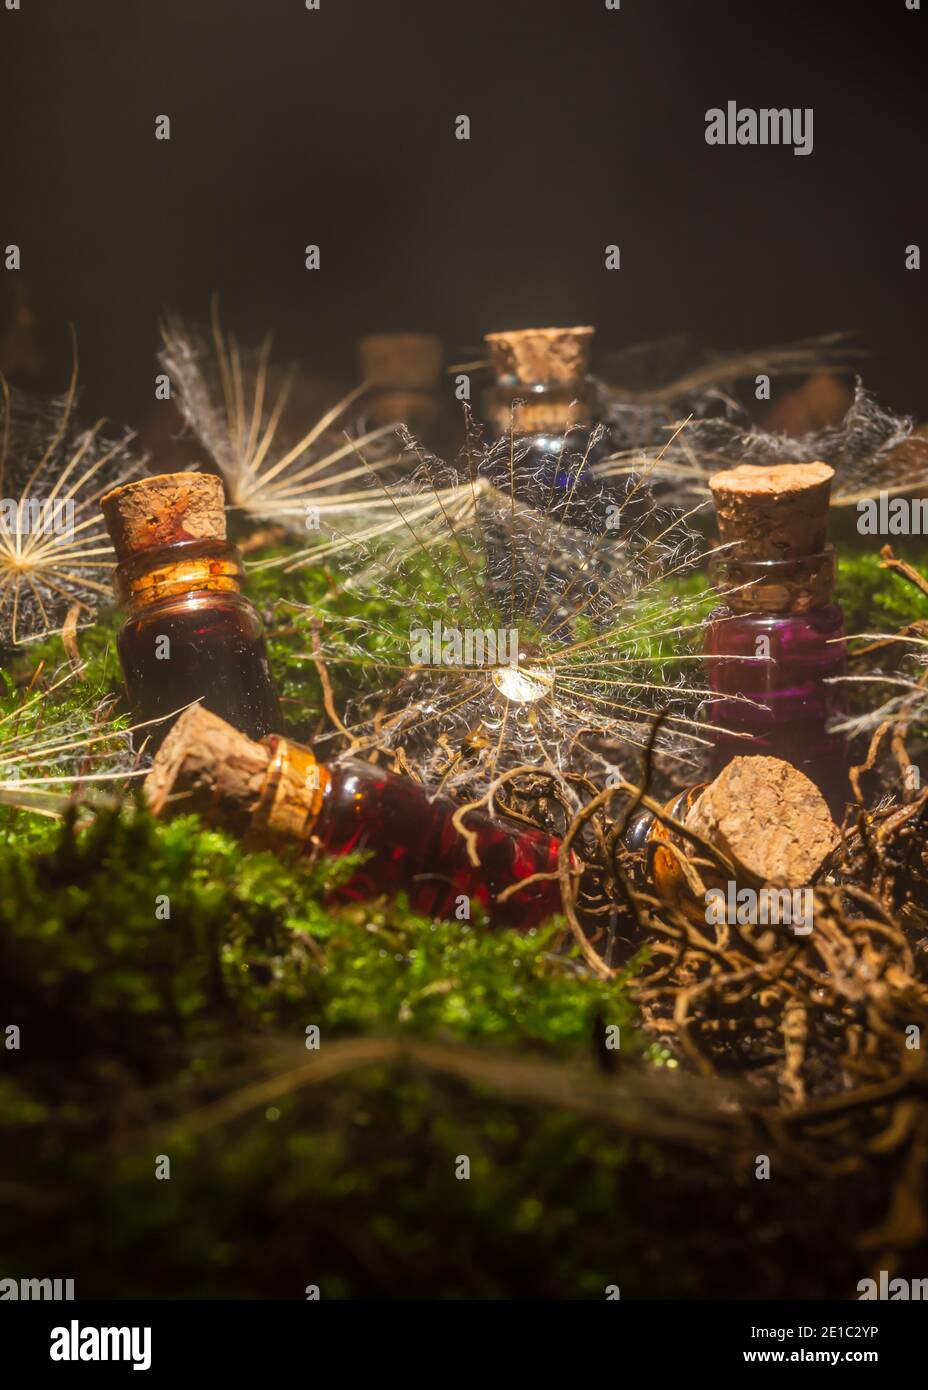 Close-up fantasy scene of a dandelion seed with a drop of water surrounded by glass mini bottles filled with colorful liquid in the mist. Stock Photo